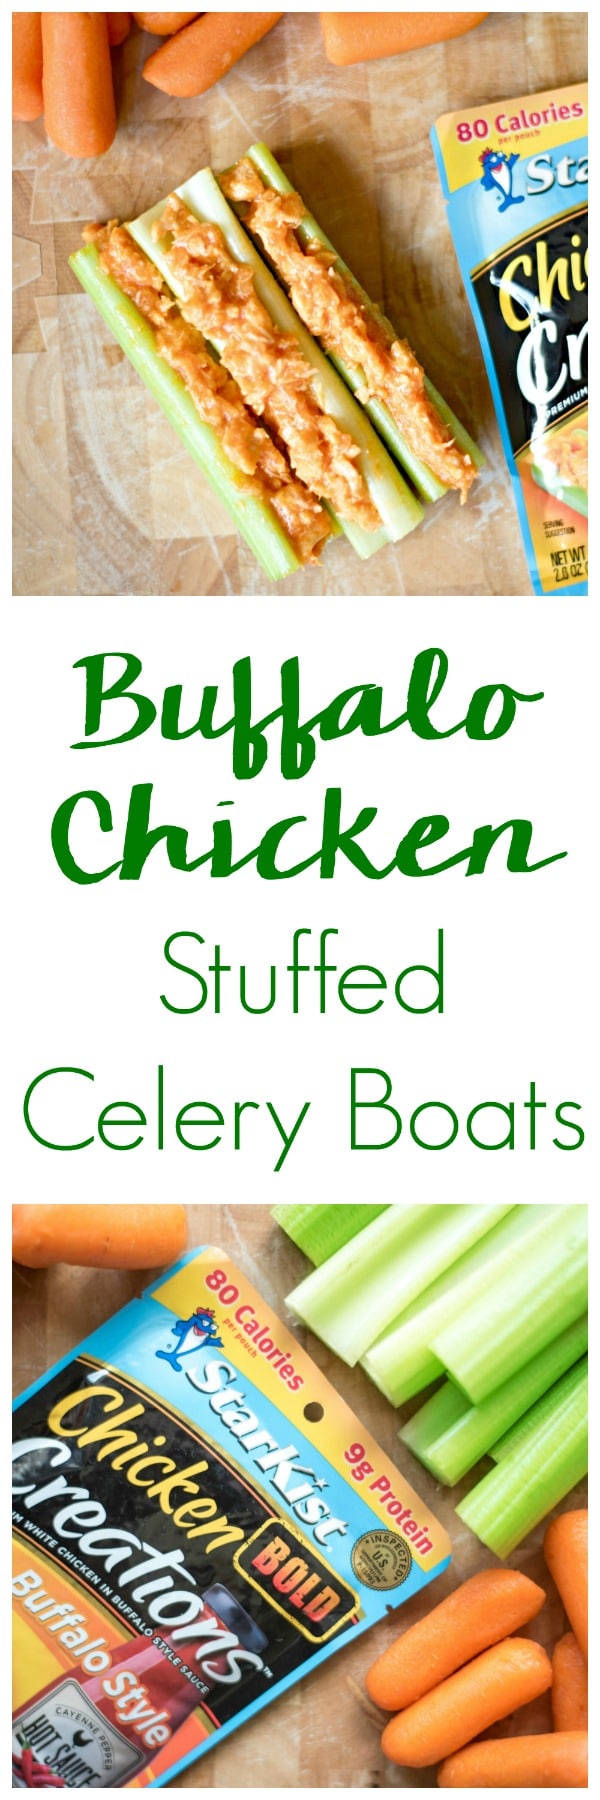 Convenience and healthy living don't need to be separate. For a meal on-the-go that you can feel good about try these 5 Ways to Serve StarKist Chicken Creations Buffalo!